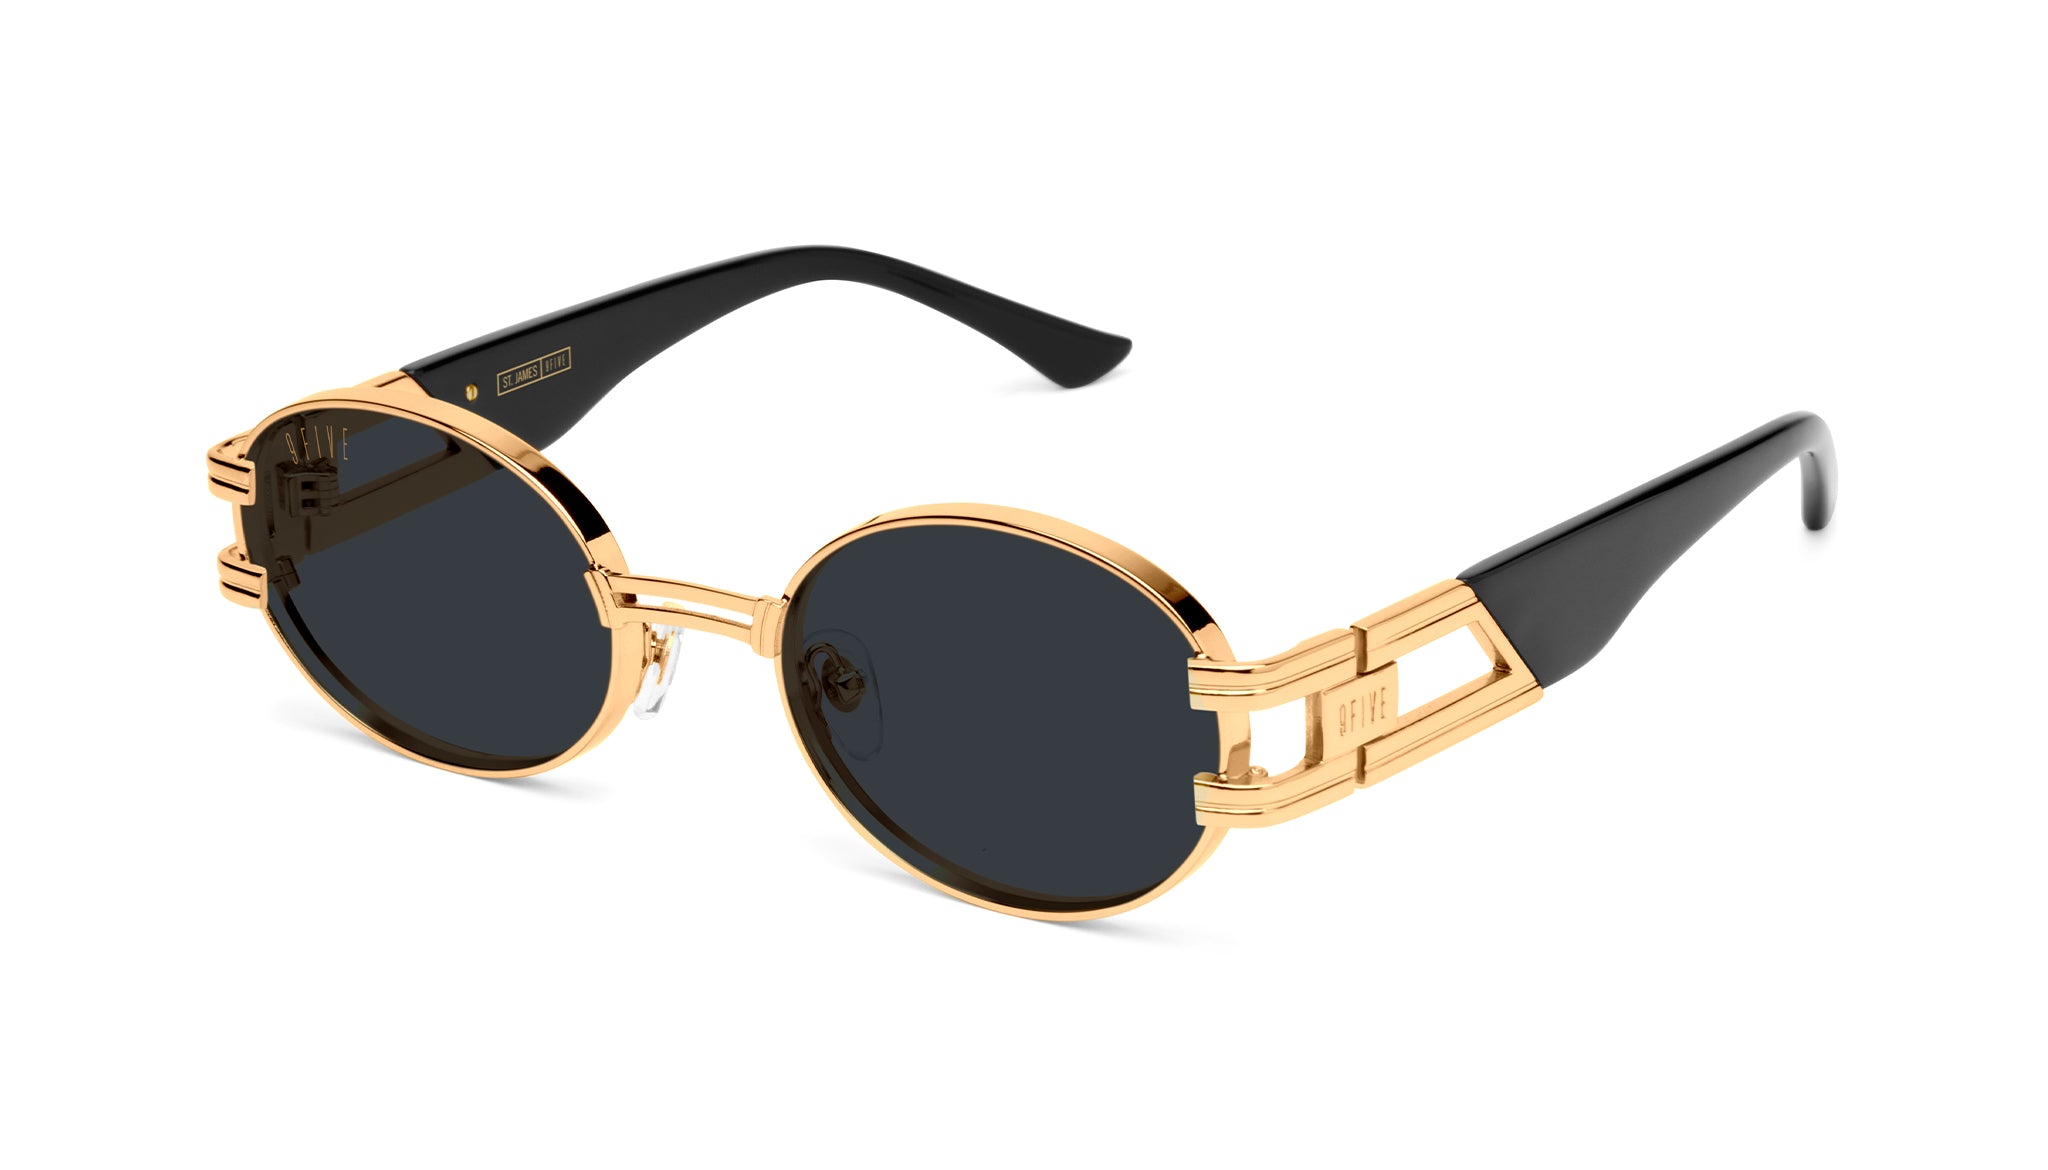 Cartier CT0132S 001 Black and Gold Sunglasses - US